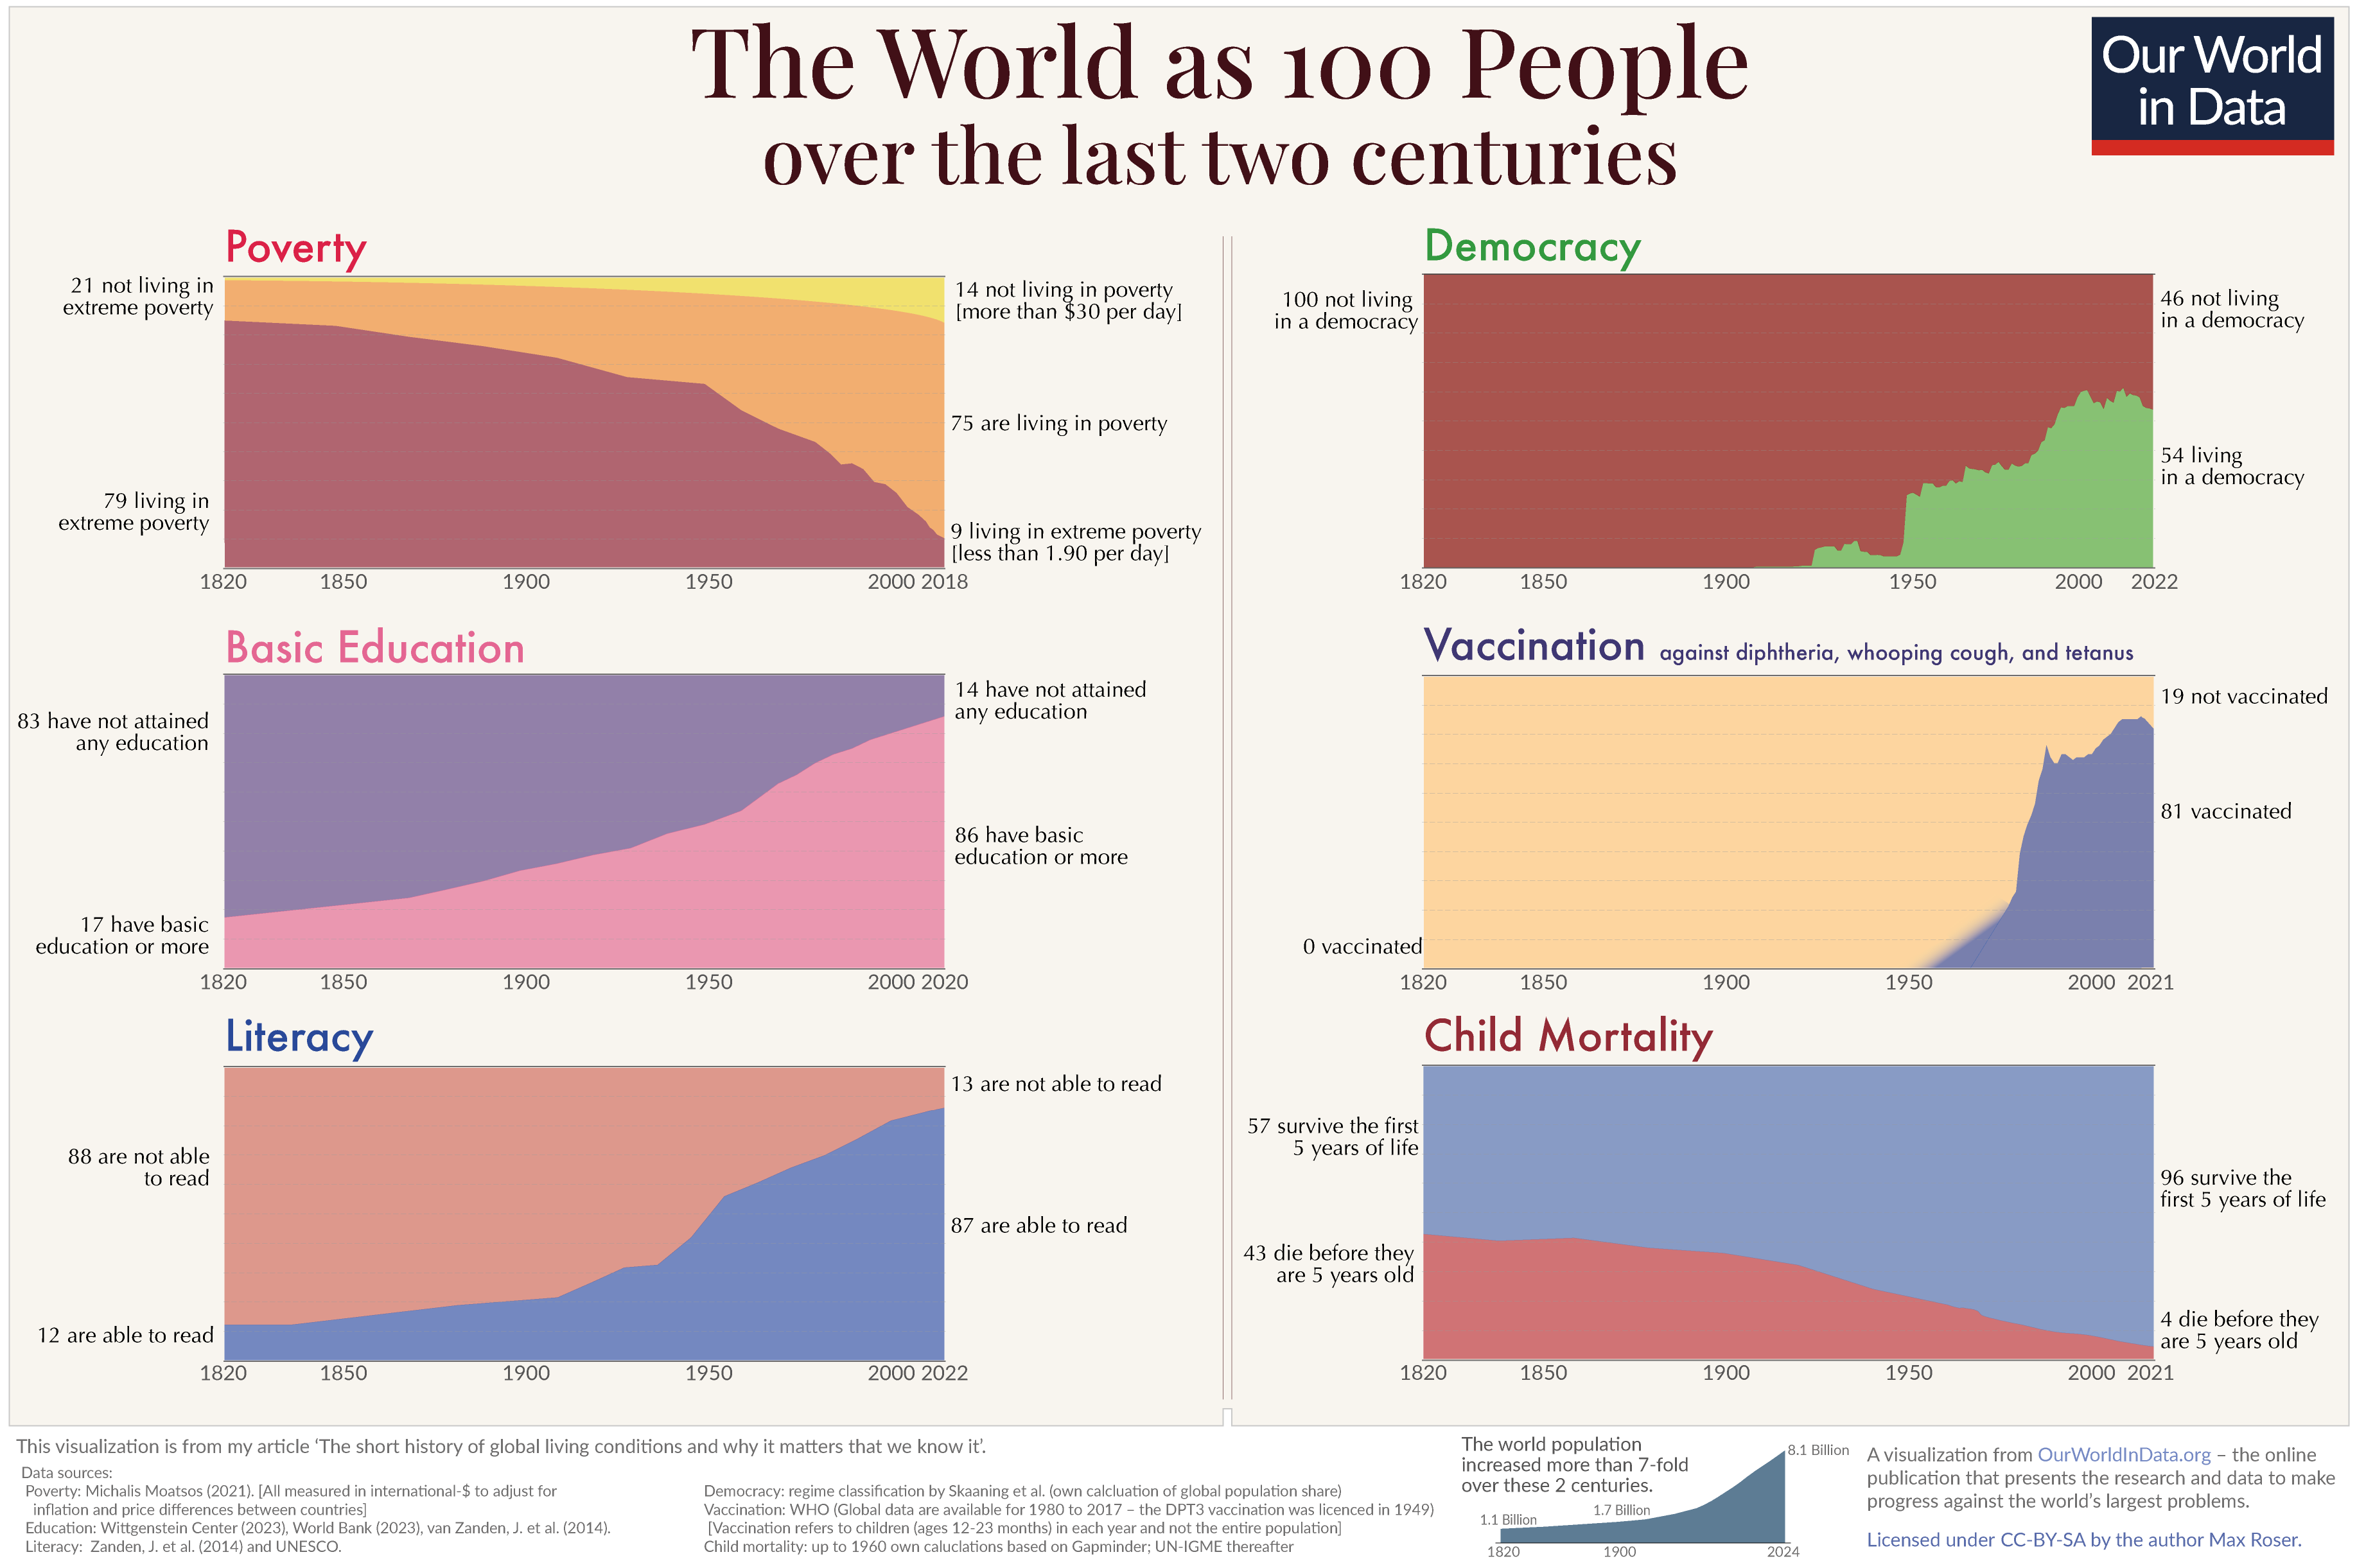 A summary visualization that shows how the world has changed over the last two centuries — poverty is down, education up, child mortality down, democracy